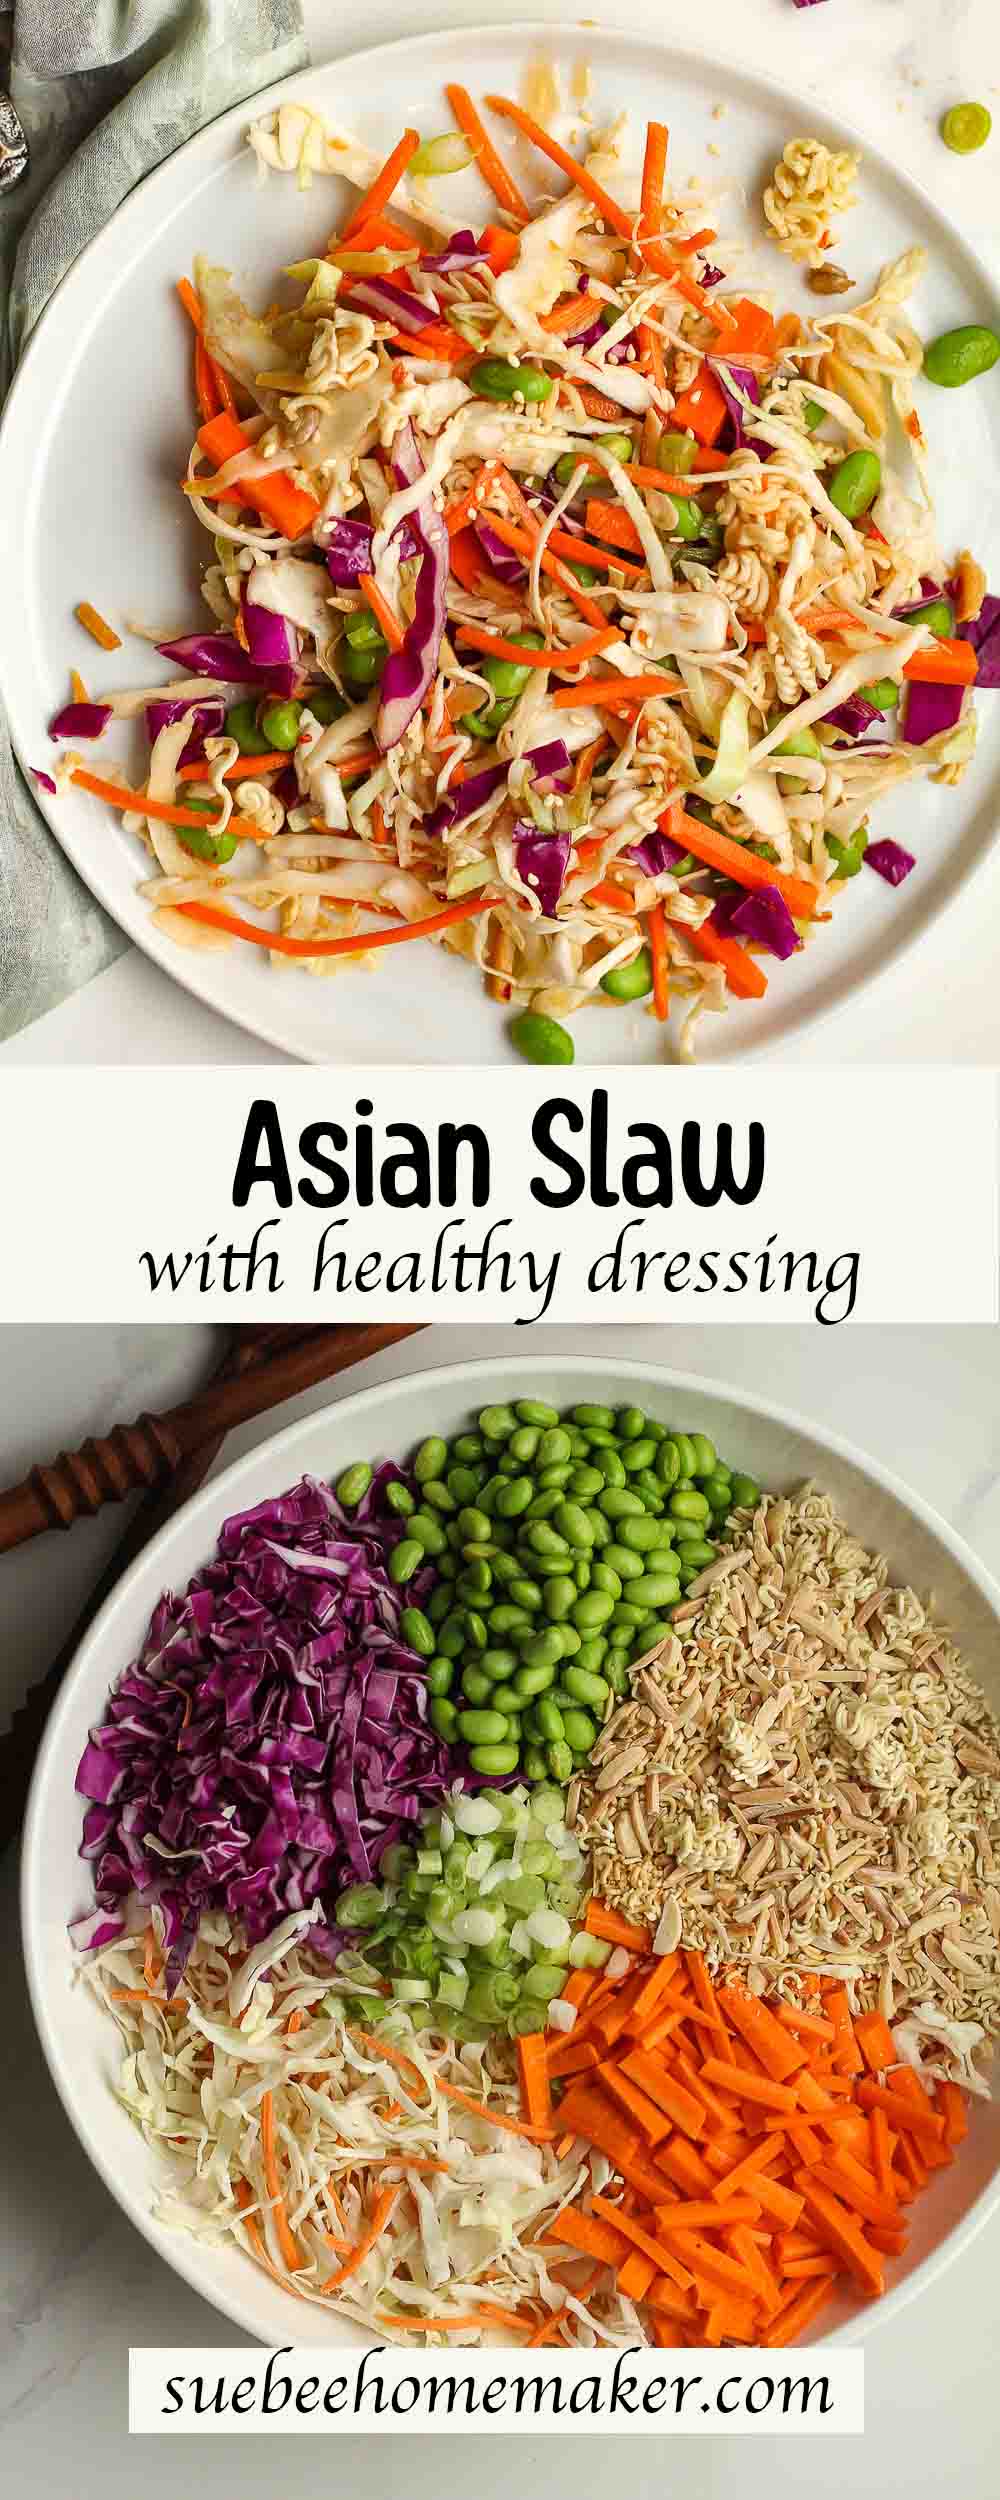 Two photos - Asian slaw with healthy dressing.